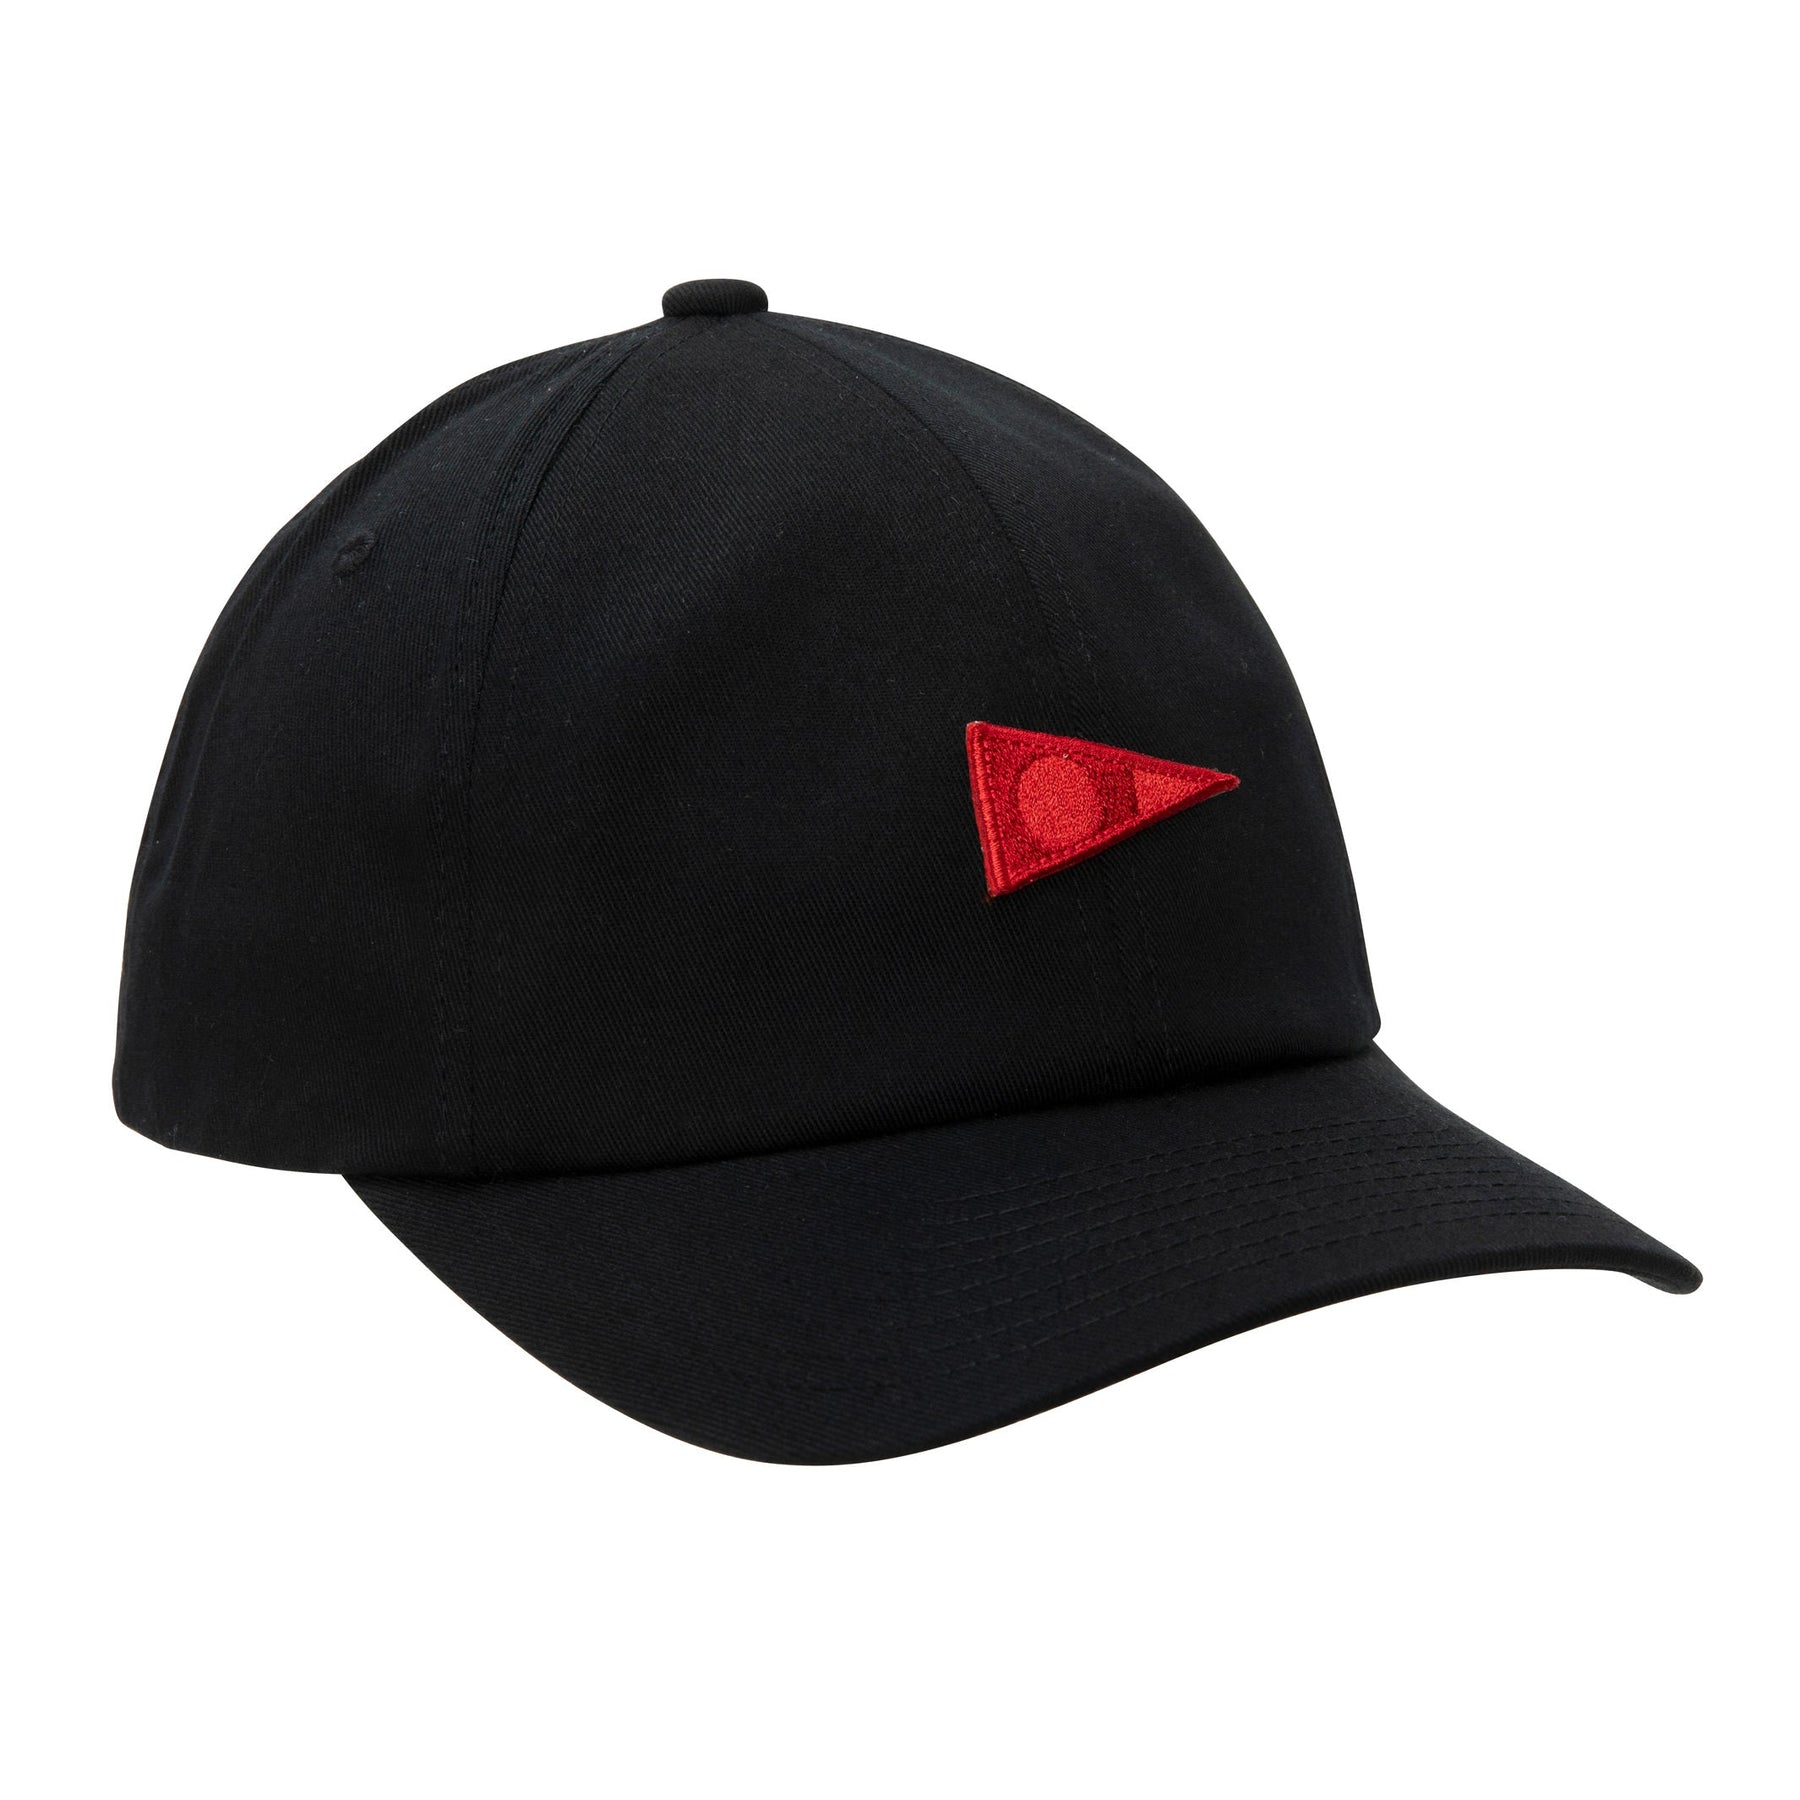 Florence Marine X - Burgee Unstructured Hat / Black - Board Store Florence Marine Xsun protection  